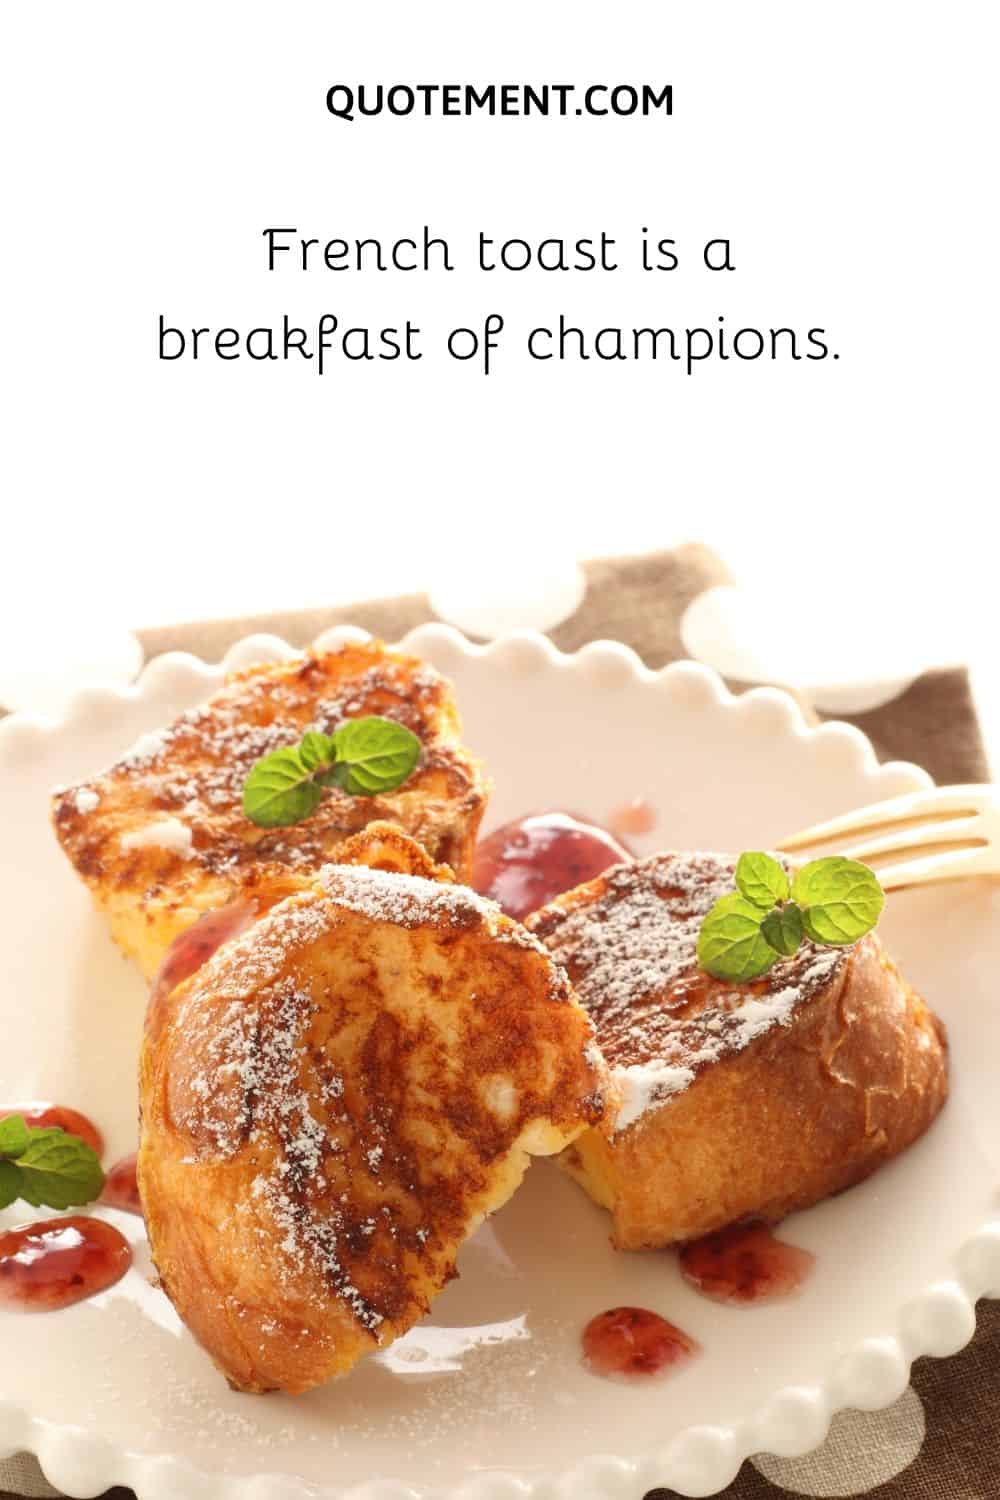 French toast is a breakfast of champions